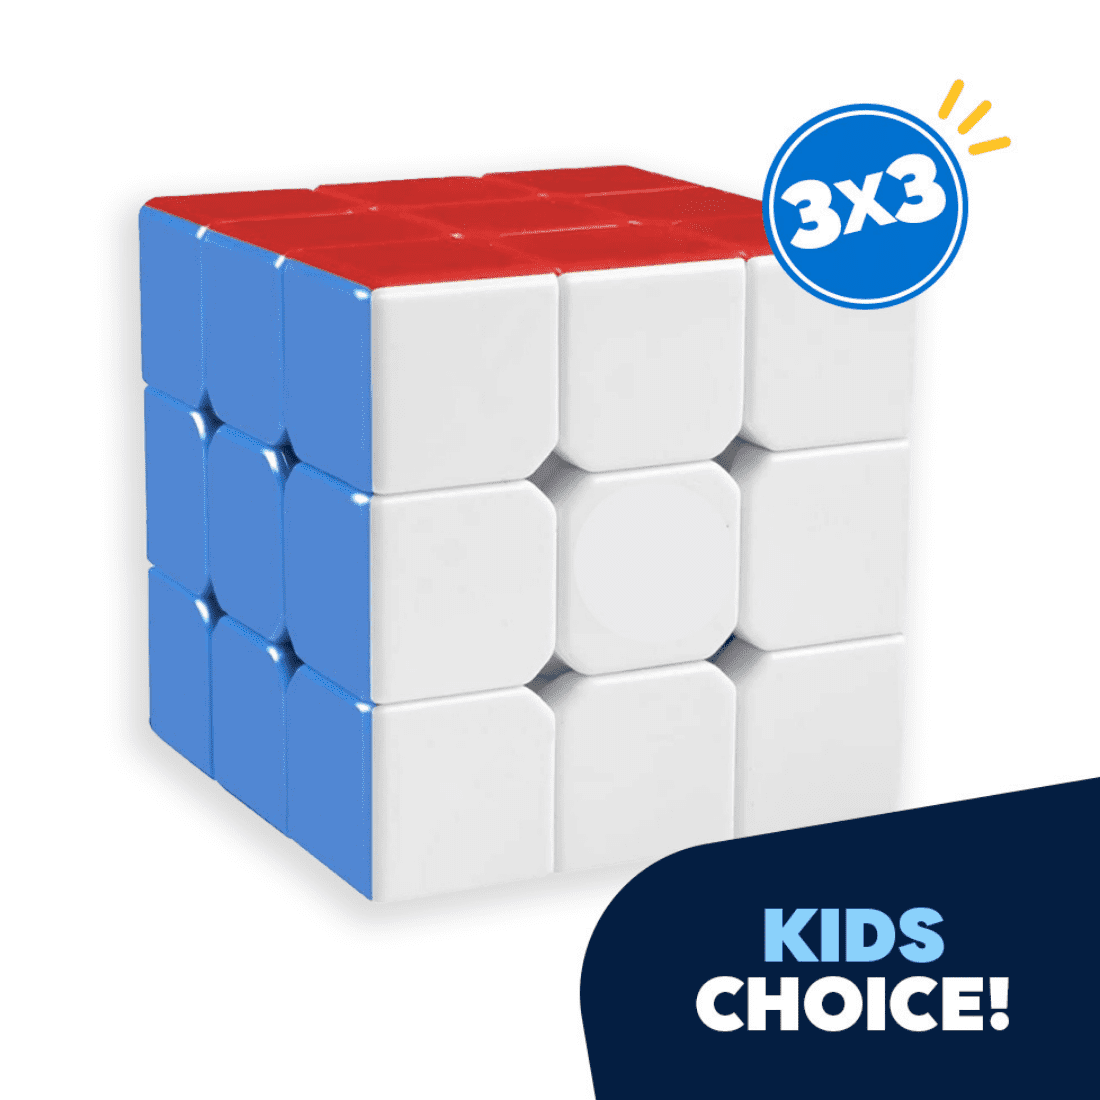 Rubik 3x3x3 Speed Magic Cube Puzzle Educational Toys For Children/Adults Gifts 